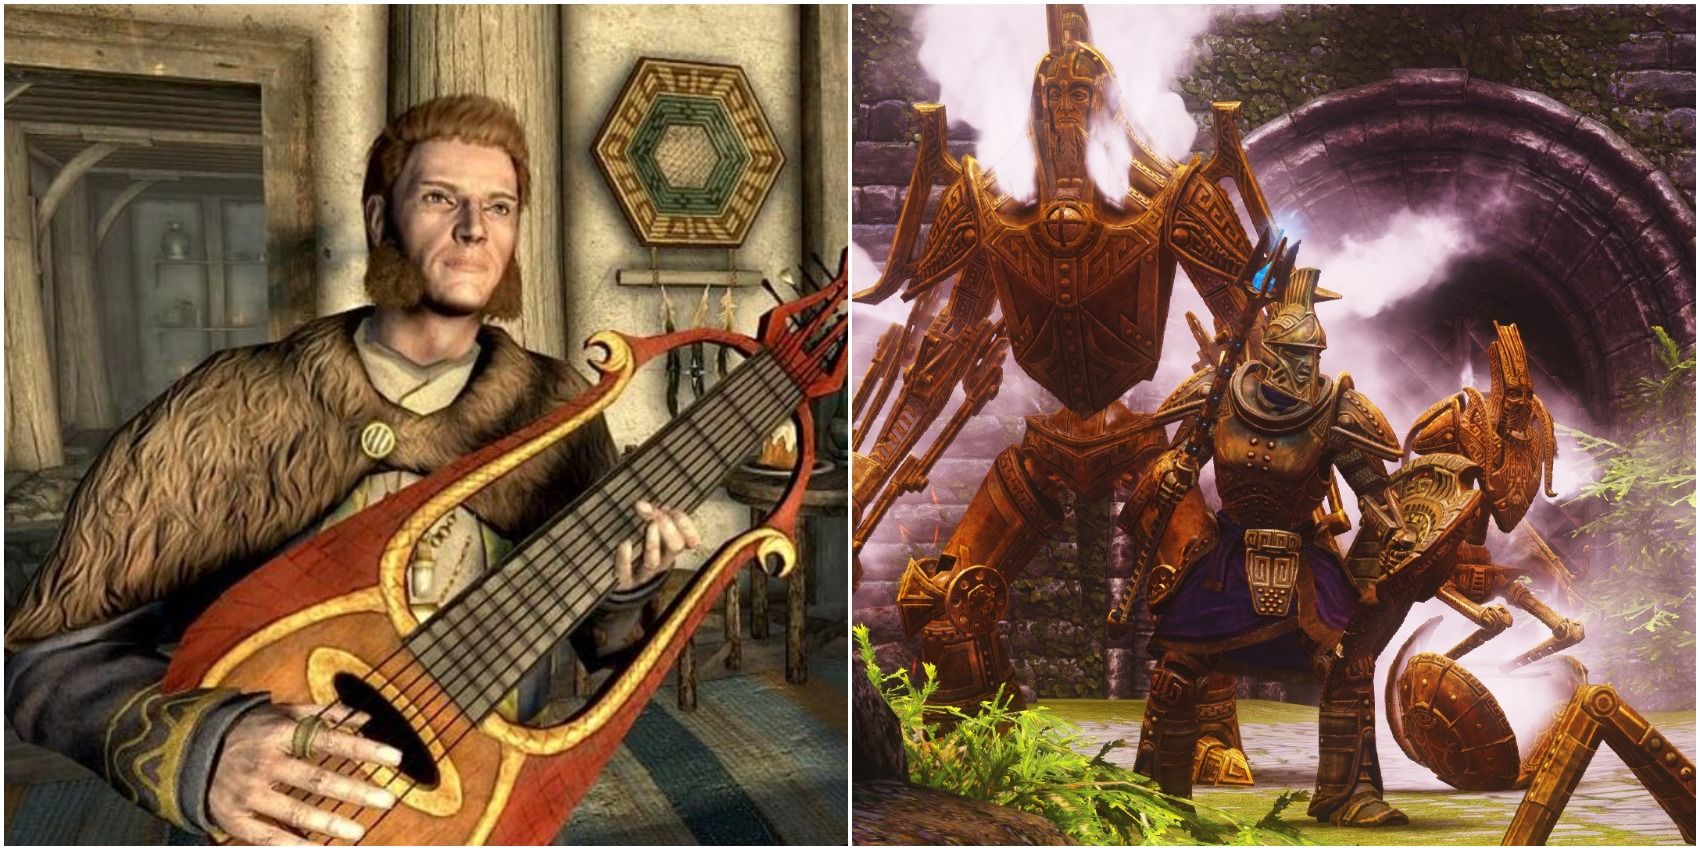 Skyrim modded builds such as bard and Dwemer soldier